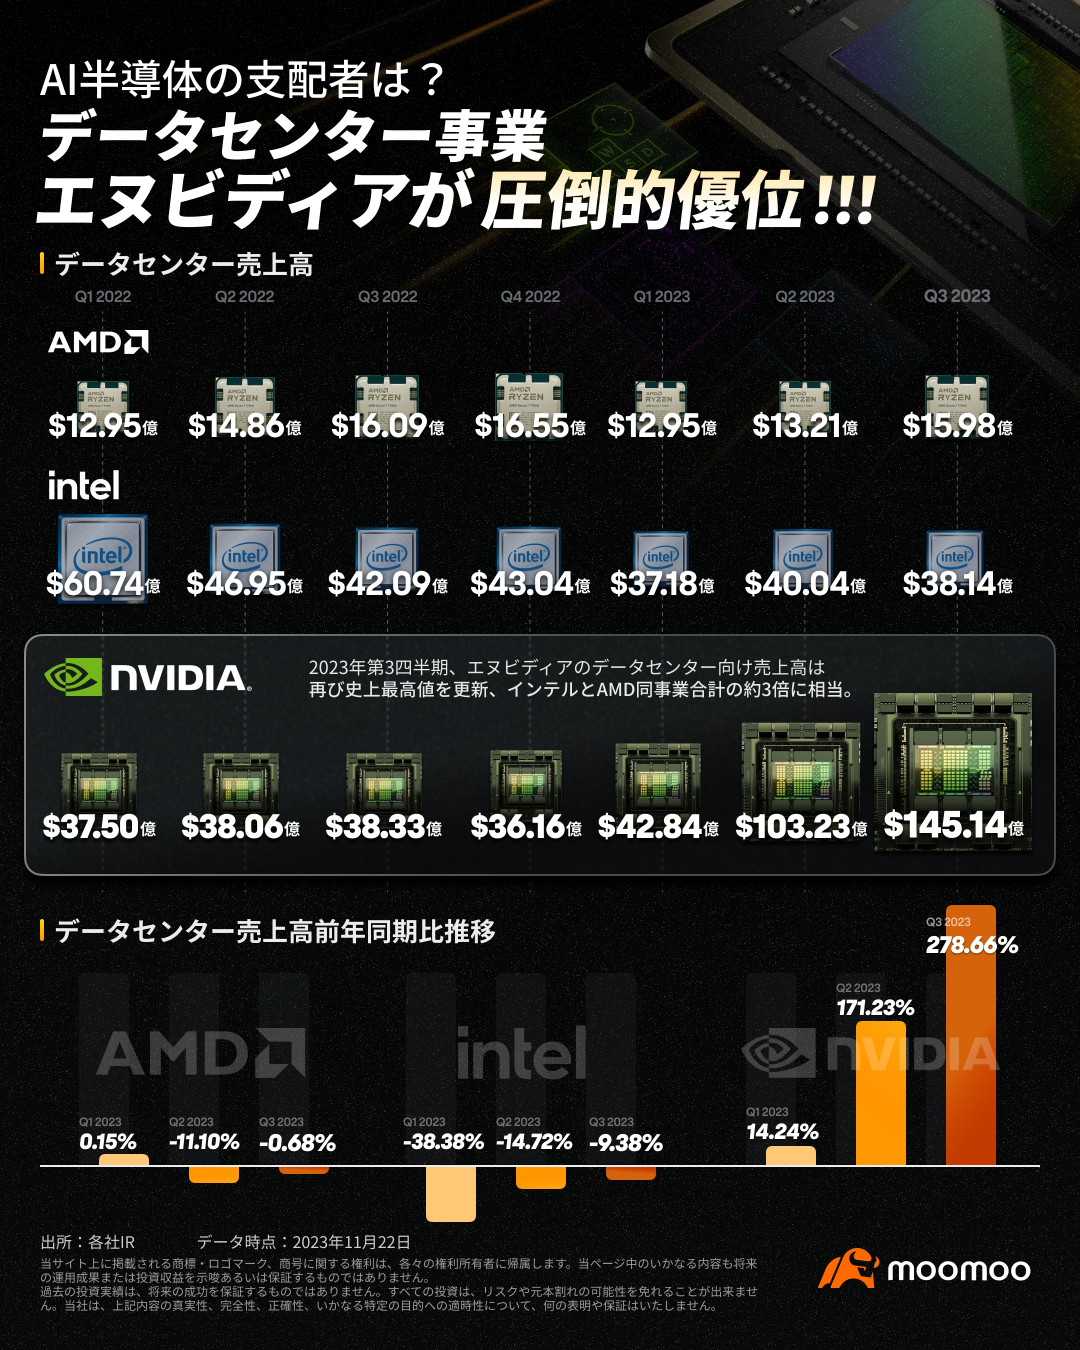 NVIDIA's data center business has an overwhelming advantage over competitors